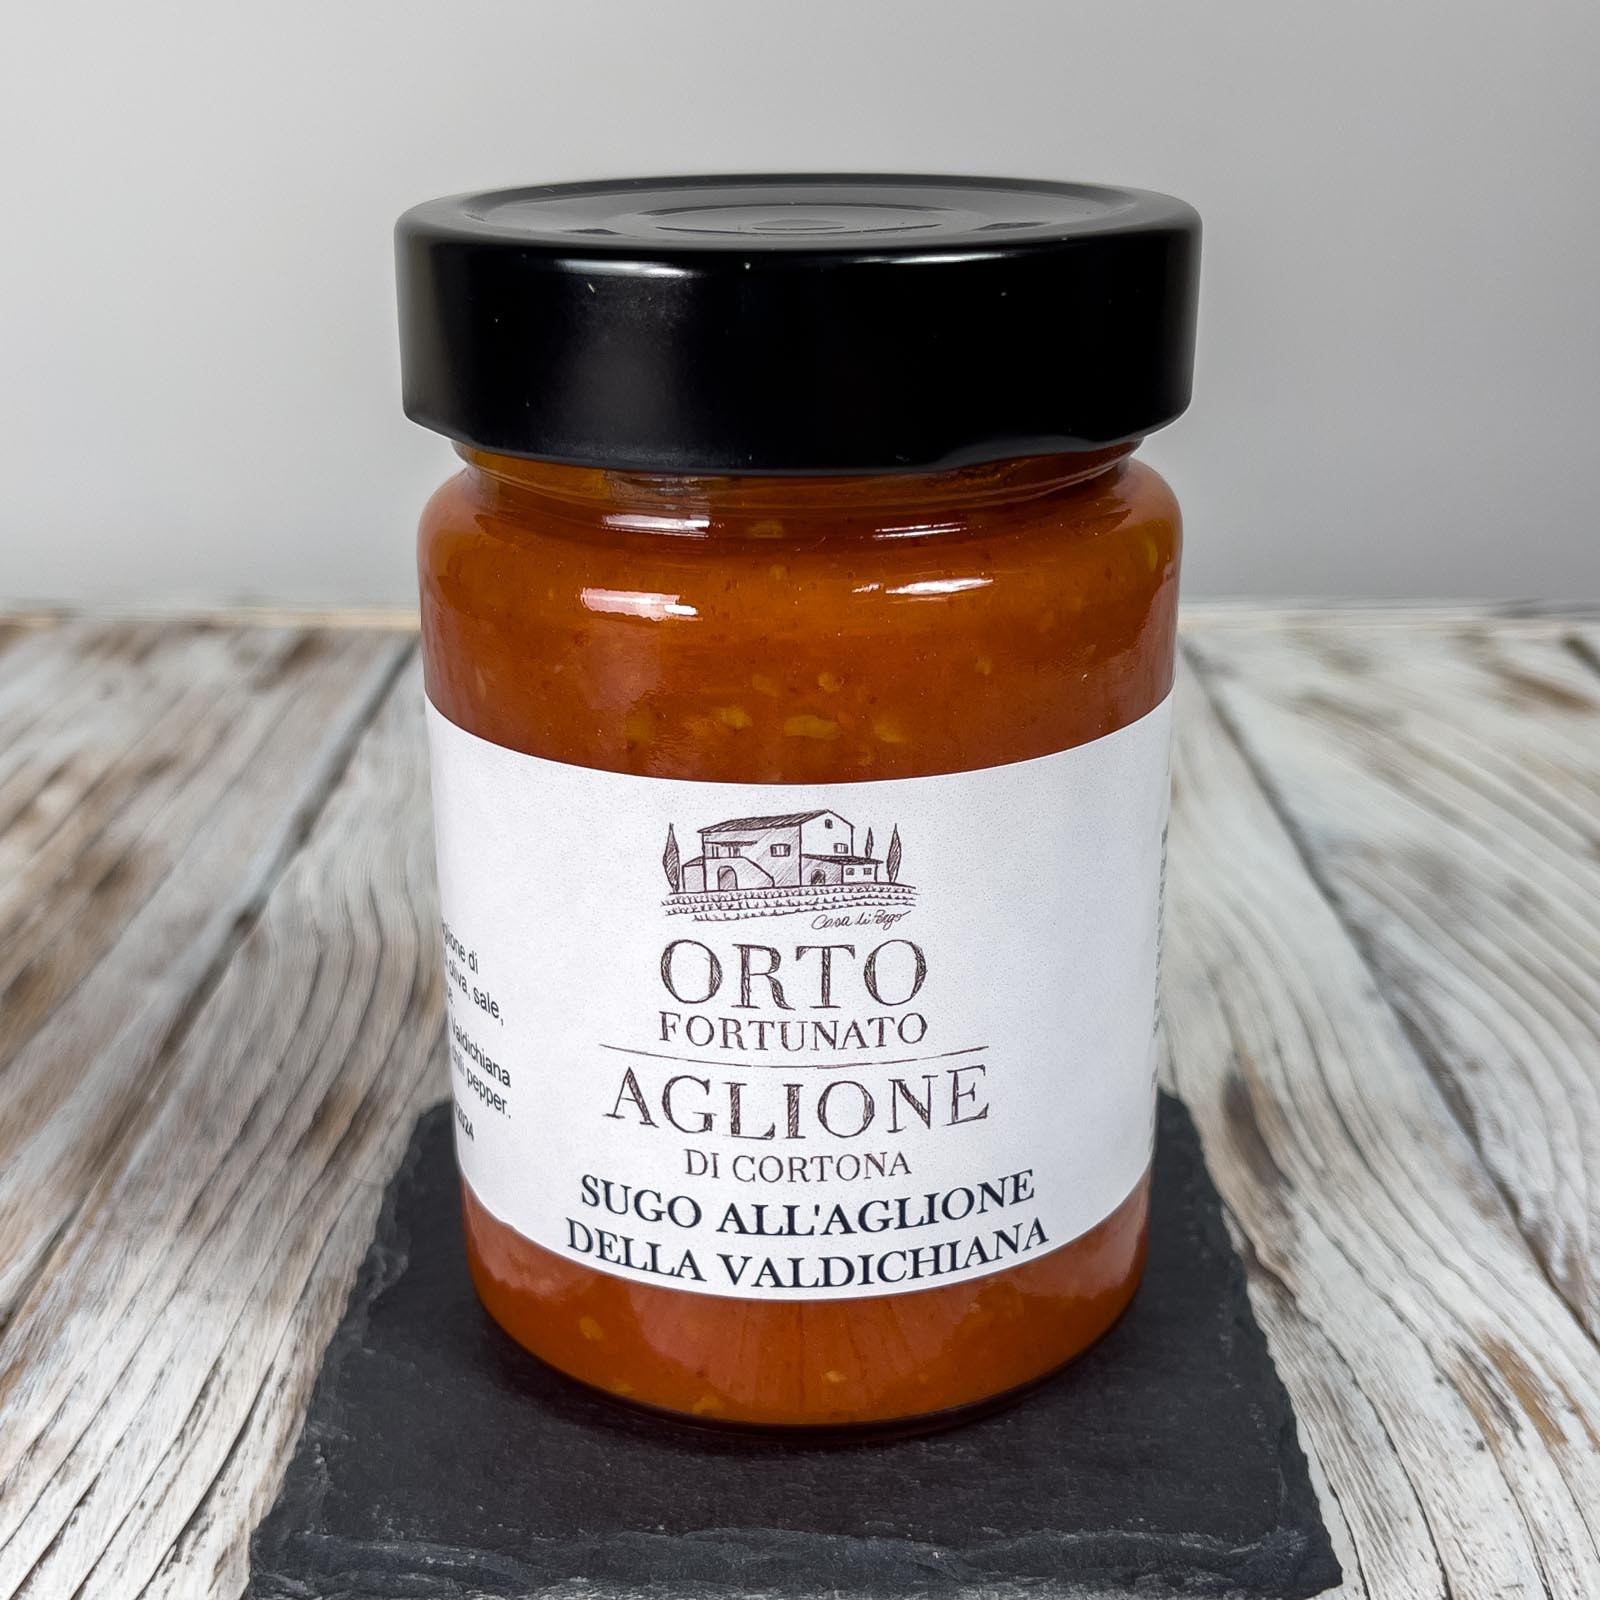 Pasta sauce sweetly flavored with hand-picked “Aglione della Valdichiana”, much more delicate than its cousin Aglio, however, has a special feature, it is totally digestible and does not leave that odor, at times, unpleasant.